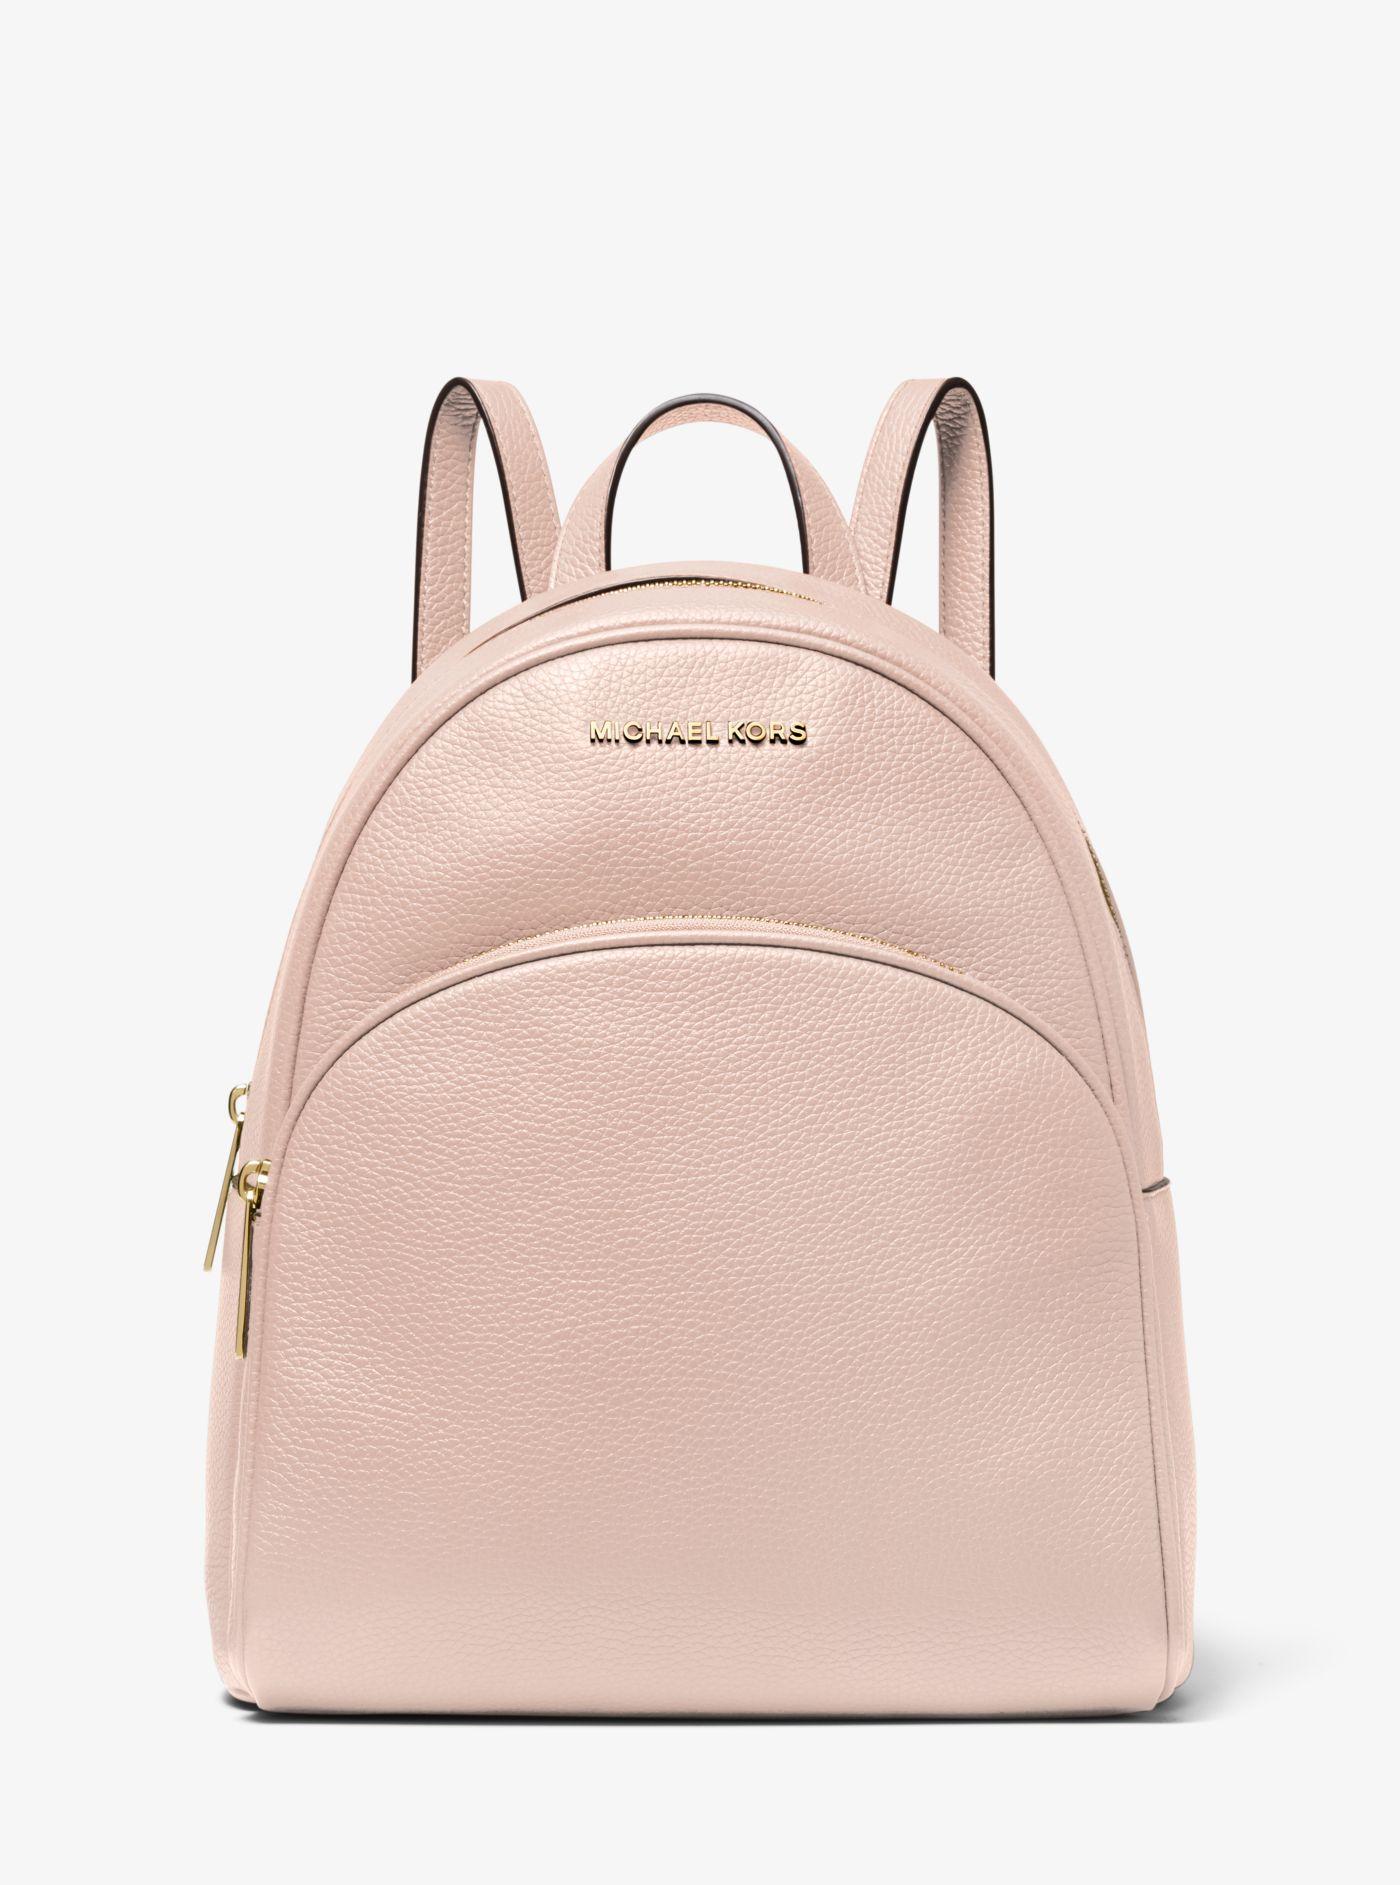 Michael Kors Abbey Medium Pebbled Leather Backpack in Pink | Lyst